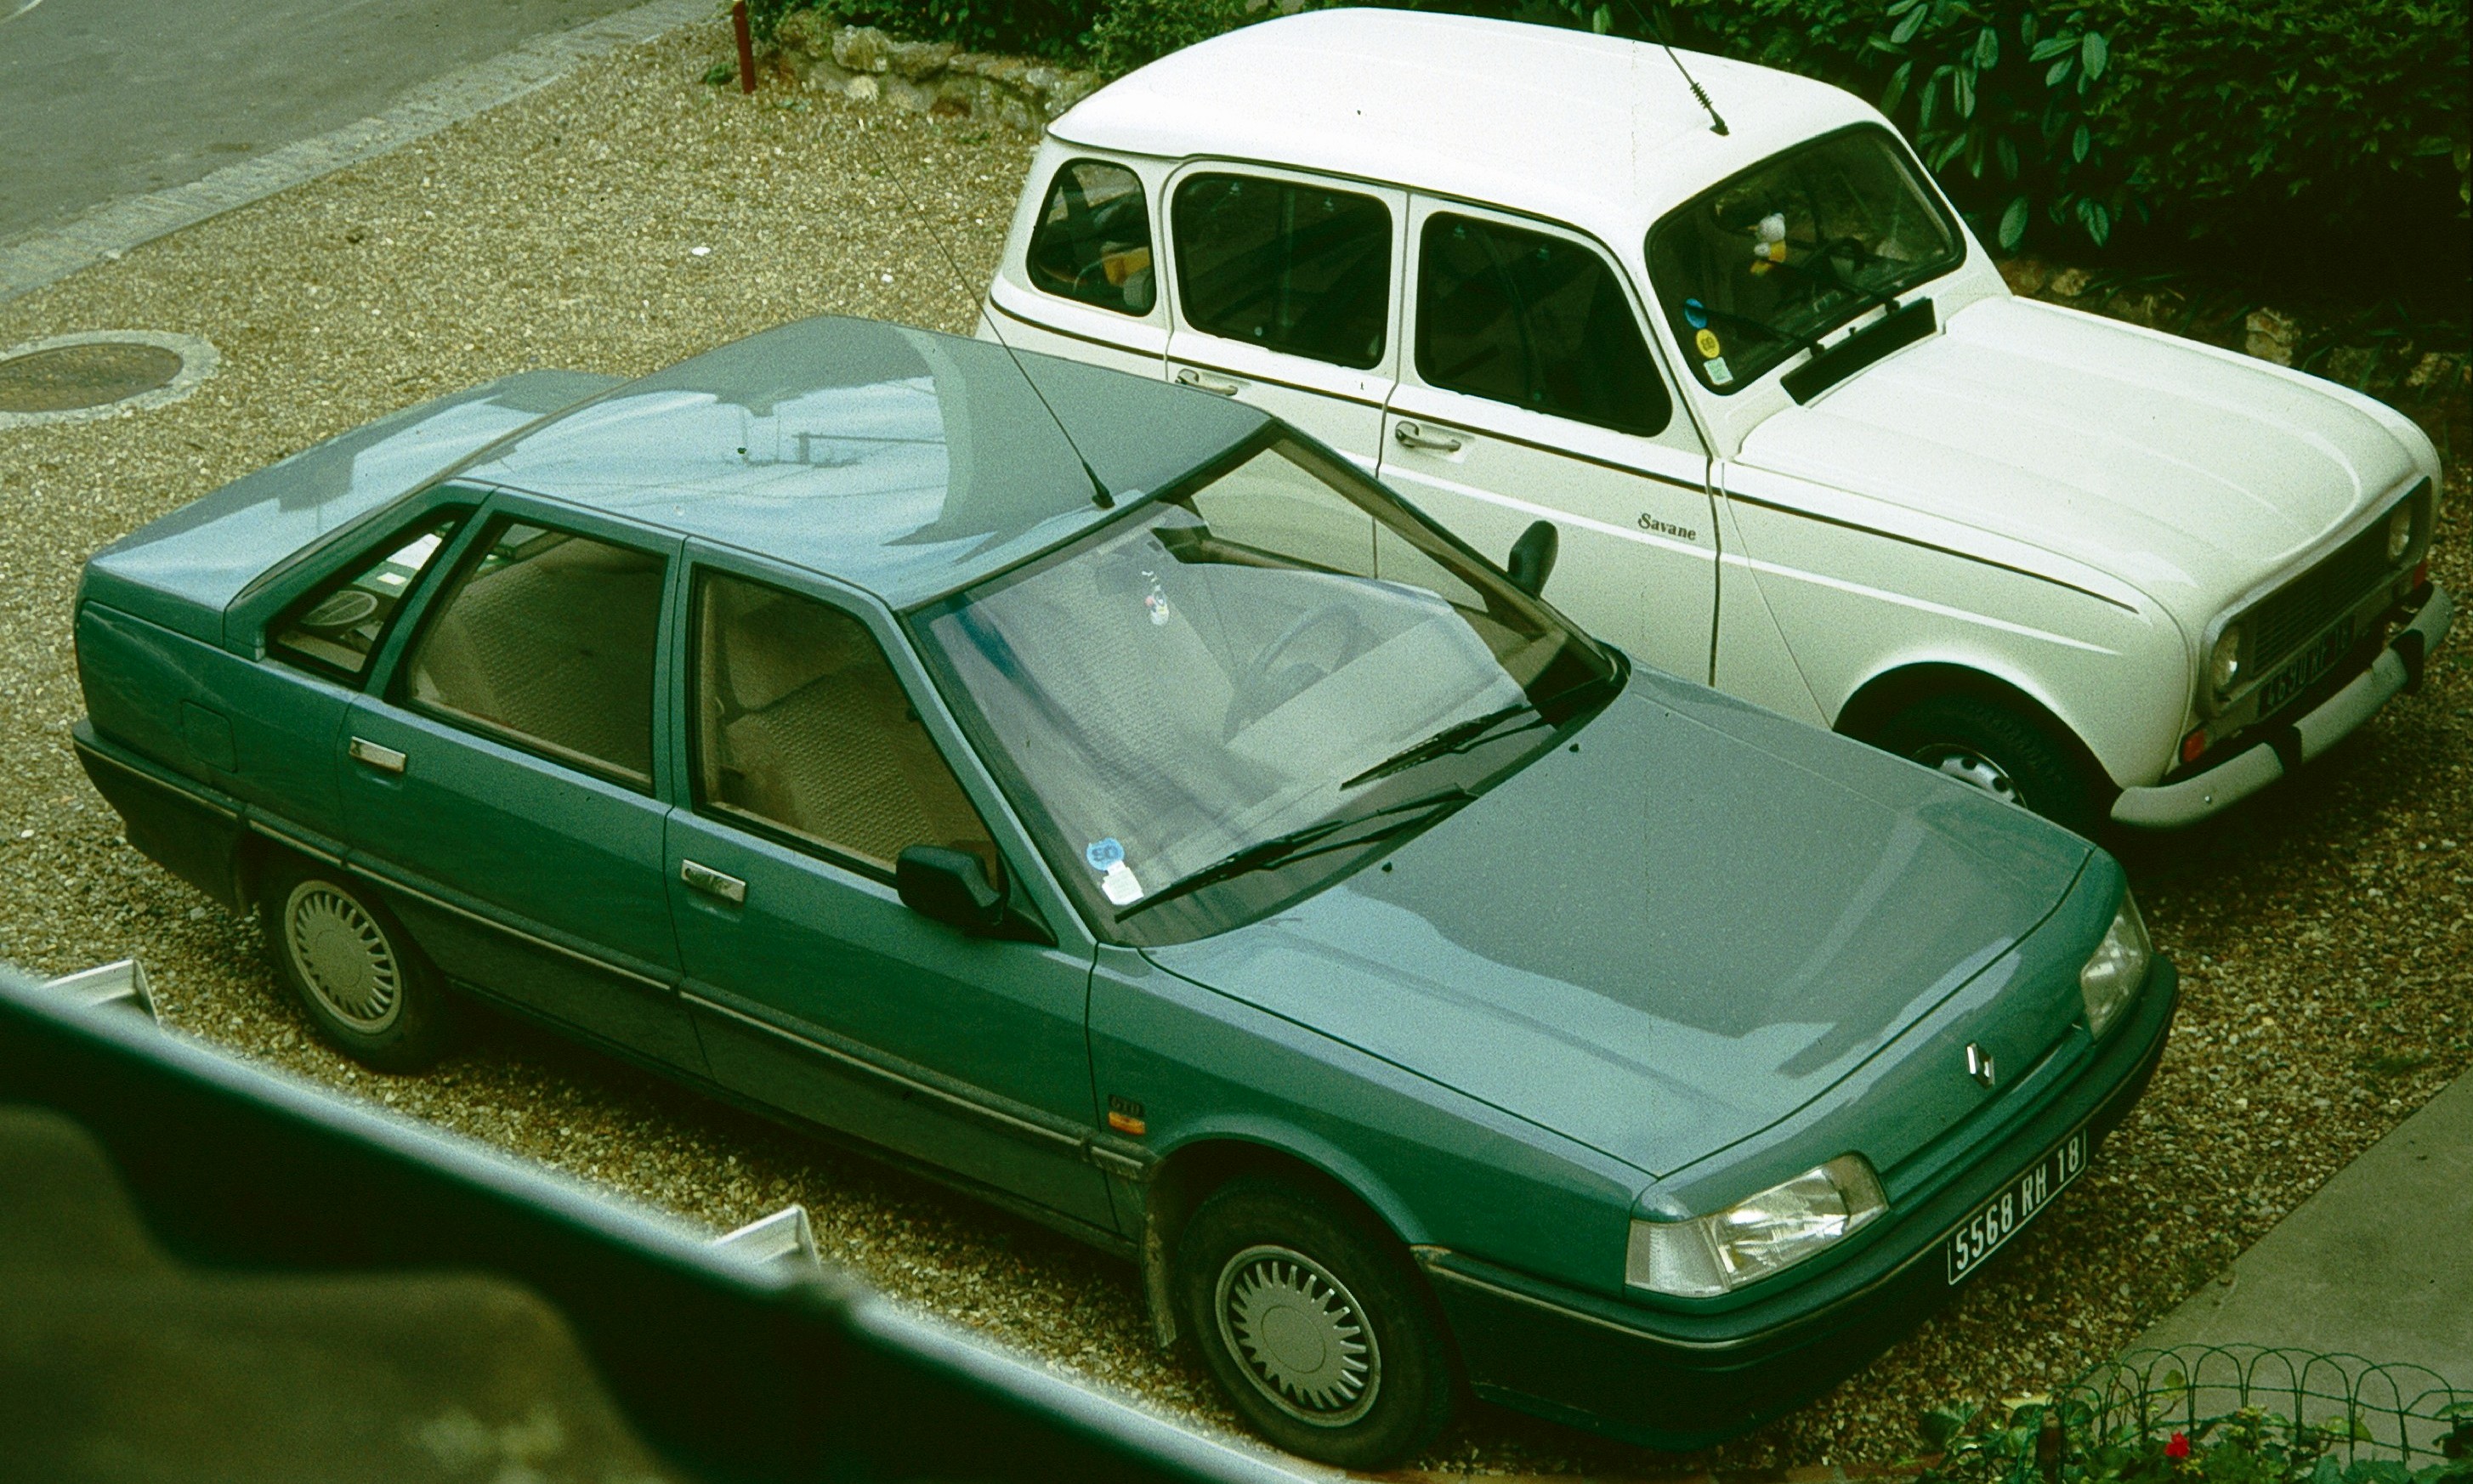 File:Renault 21 from upstairs.jpg - Wikimedia Commons